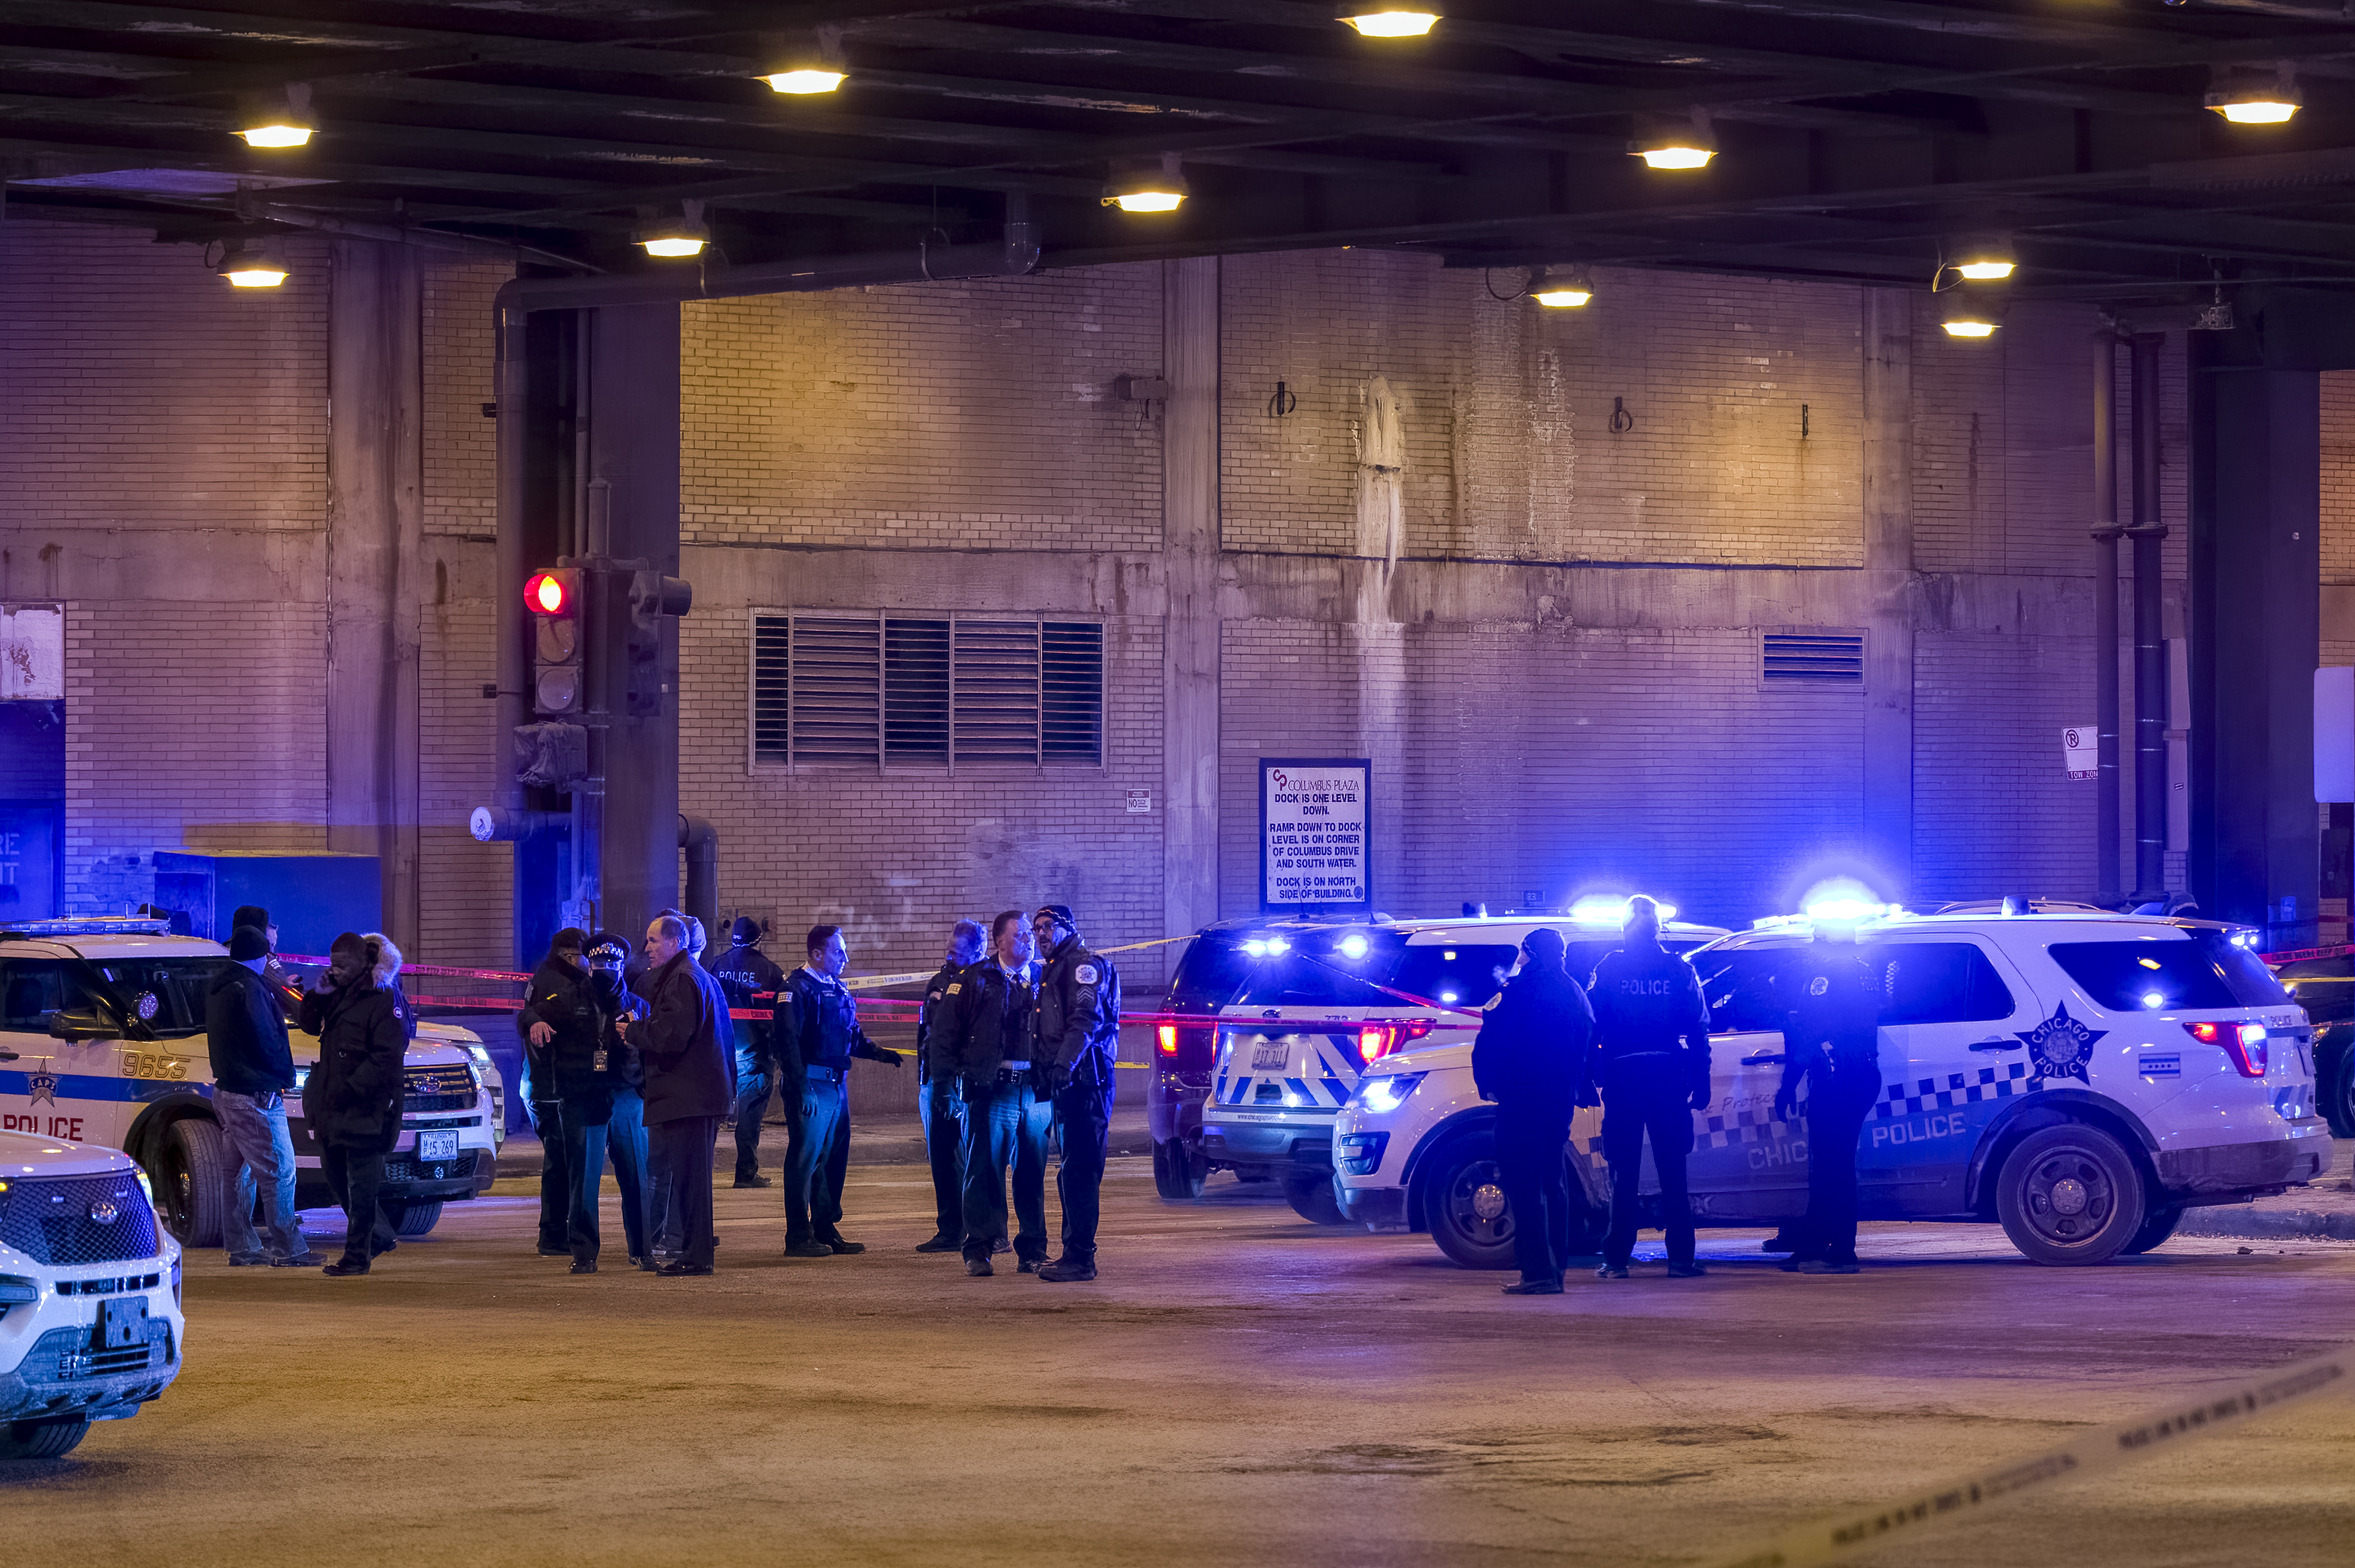 Chicago police work the scene where a man was shot in a “police-involved” shooting in the 200 block of E. Lower Wacker Drive, in The Loop neighborhood, Wednesday, Jan. 26, 2022.